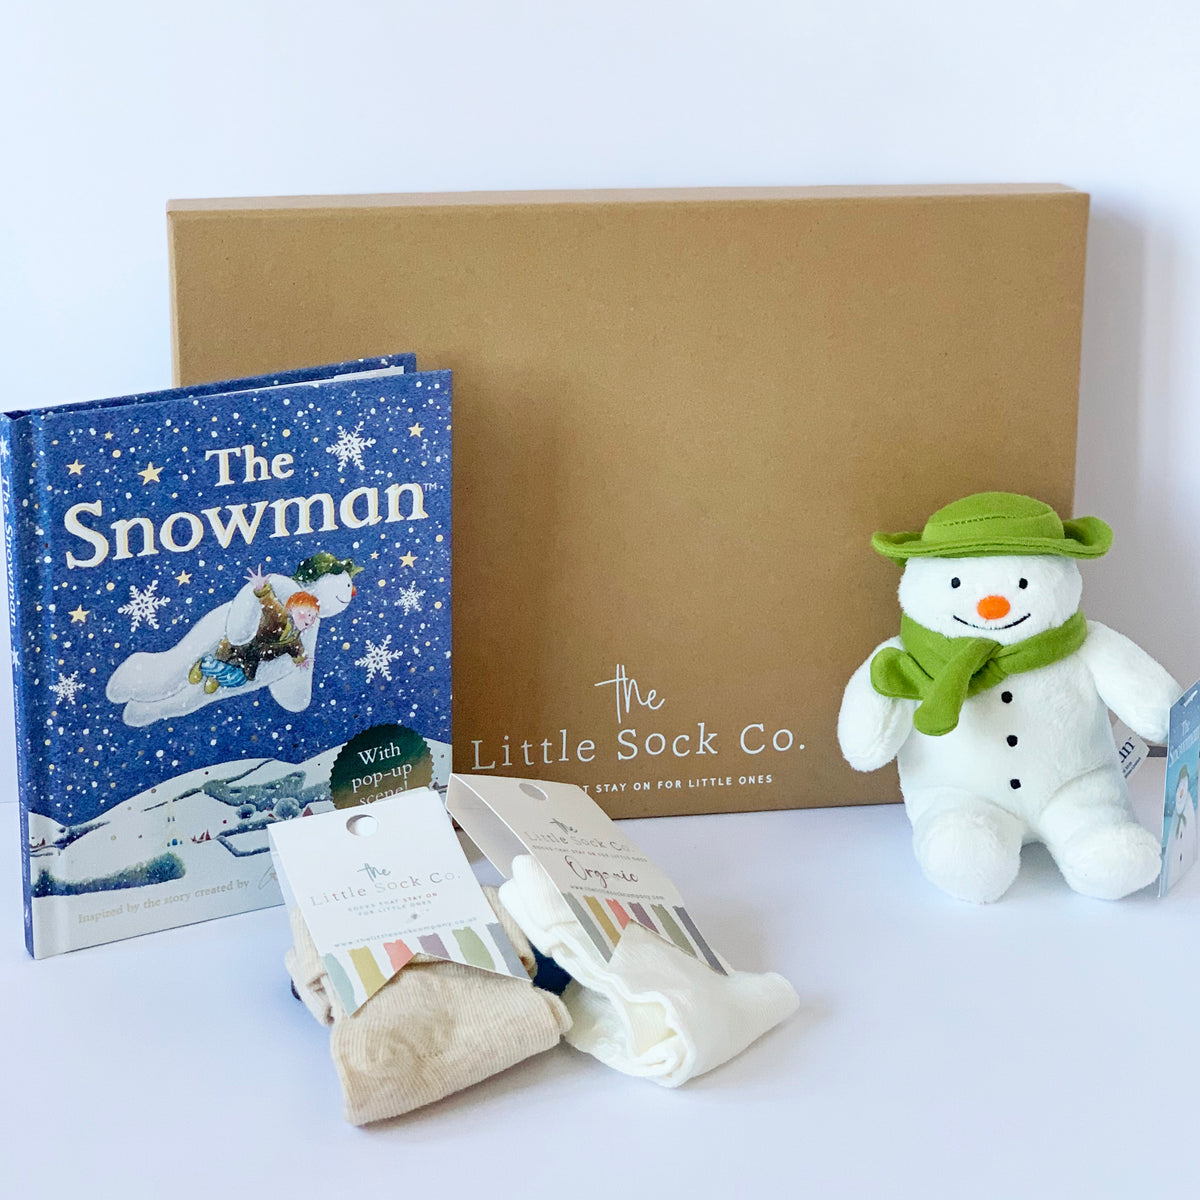 The Snowman Magical Christmas Gift Set - With brand-new pop-up book